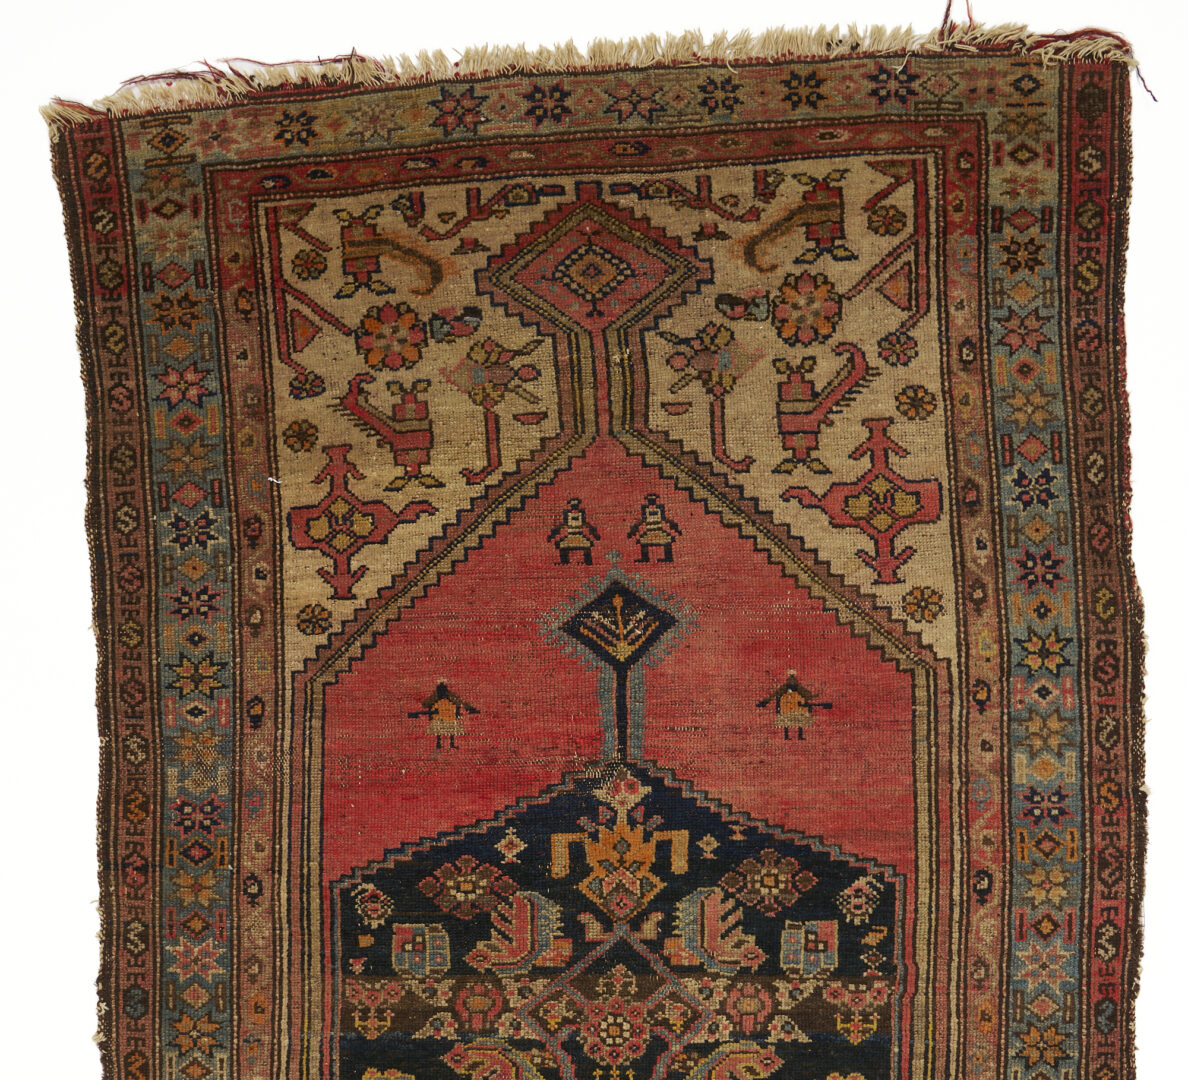 Lot 383: Two Woolen Area Rugs, Serapi and Kazak; Approx. 6' x 4'